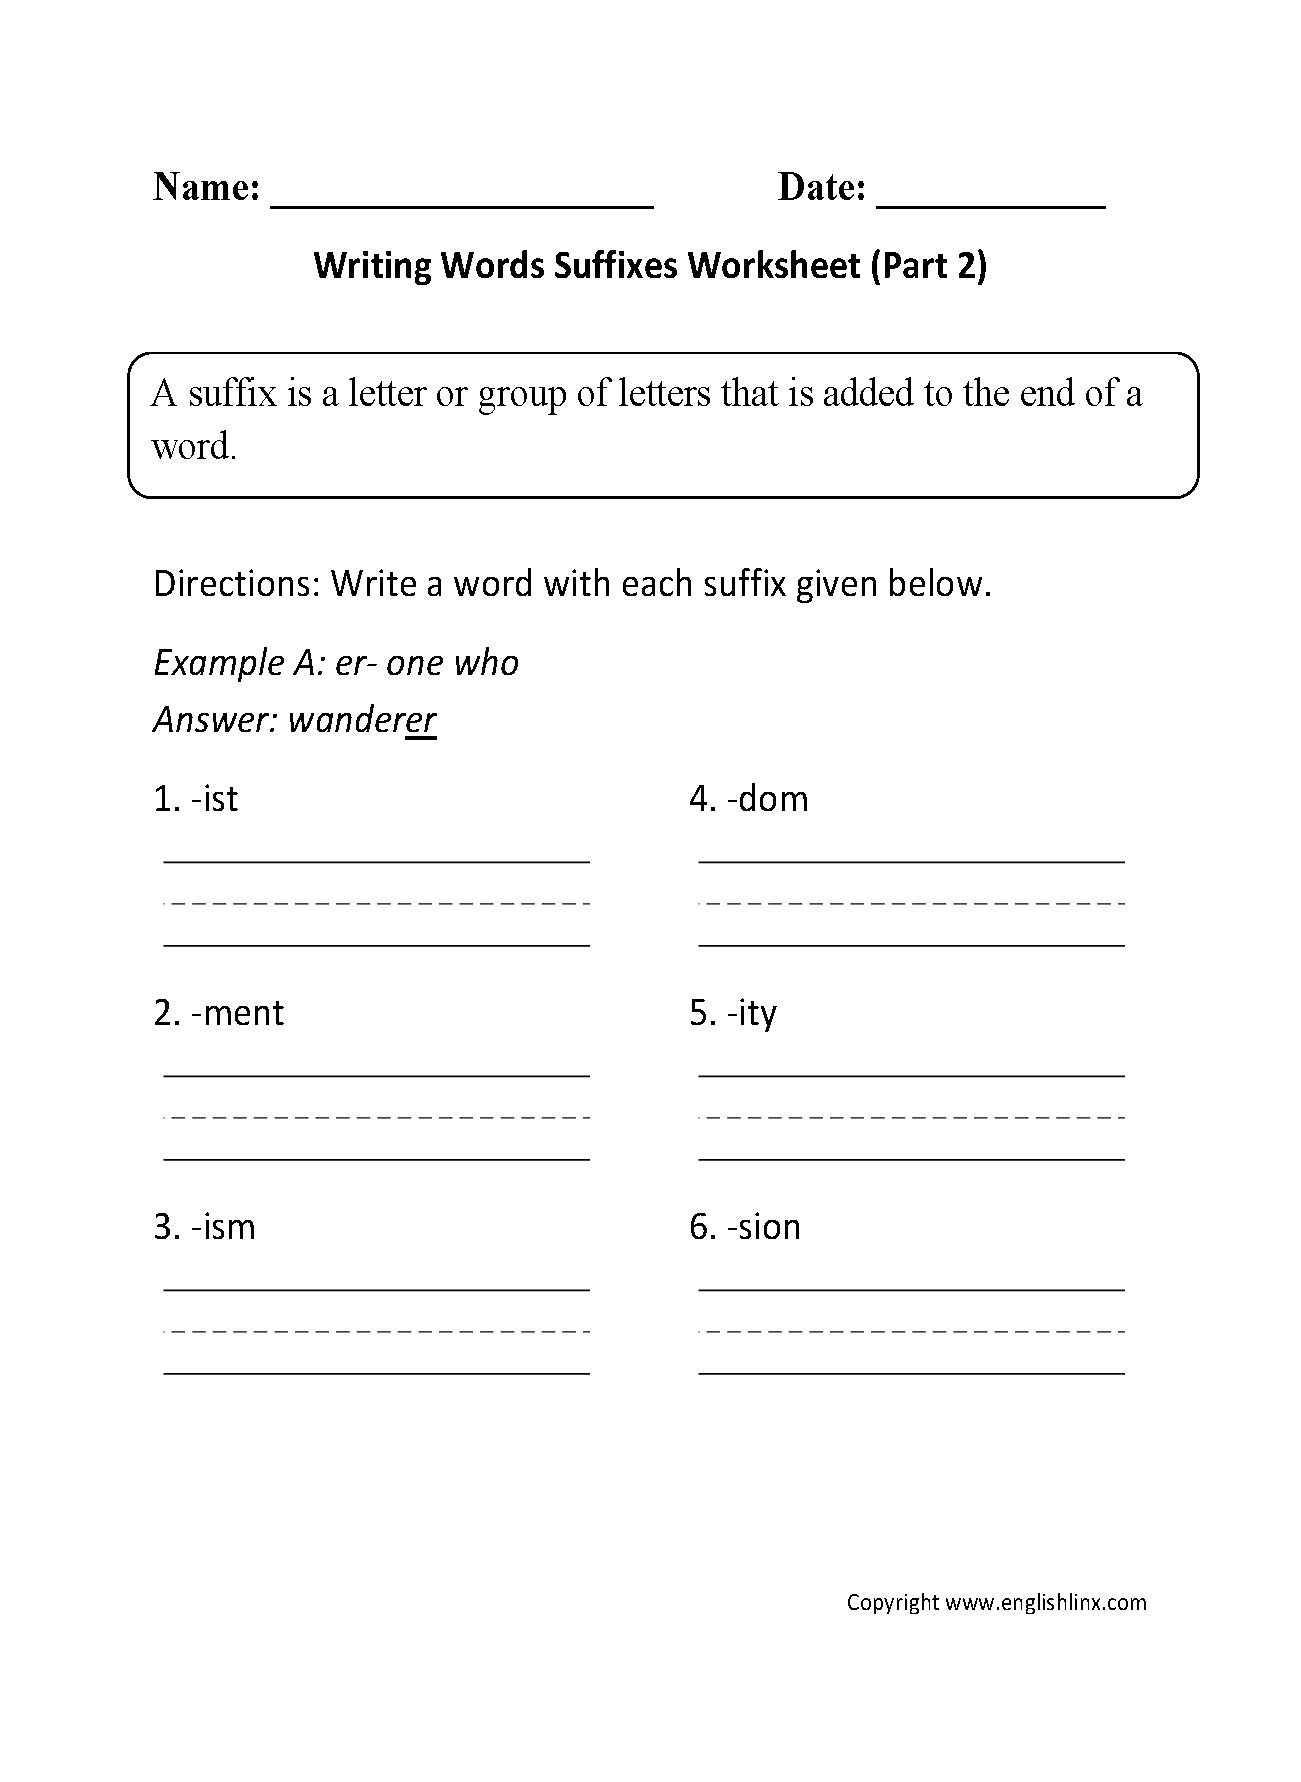 Suffixes Worksheets Pdf Db excel